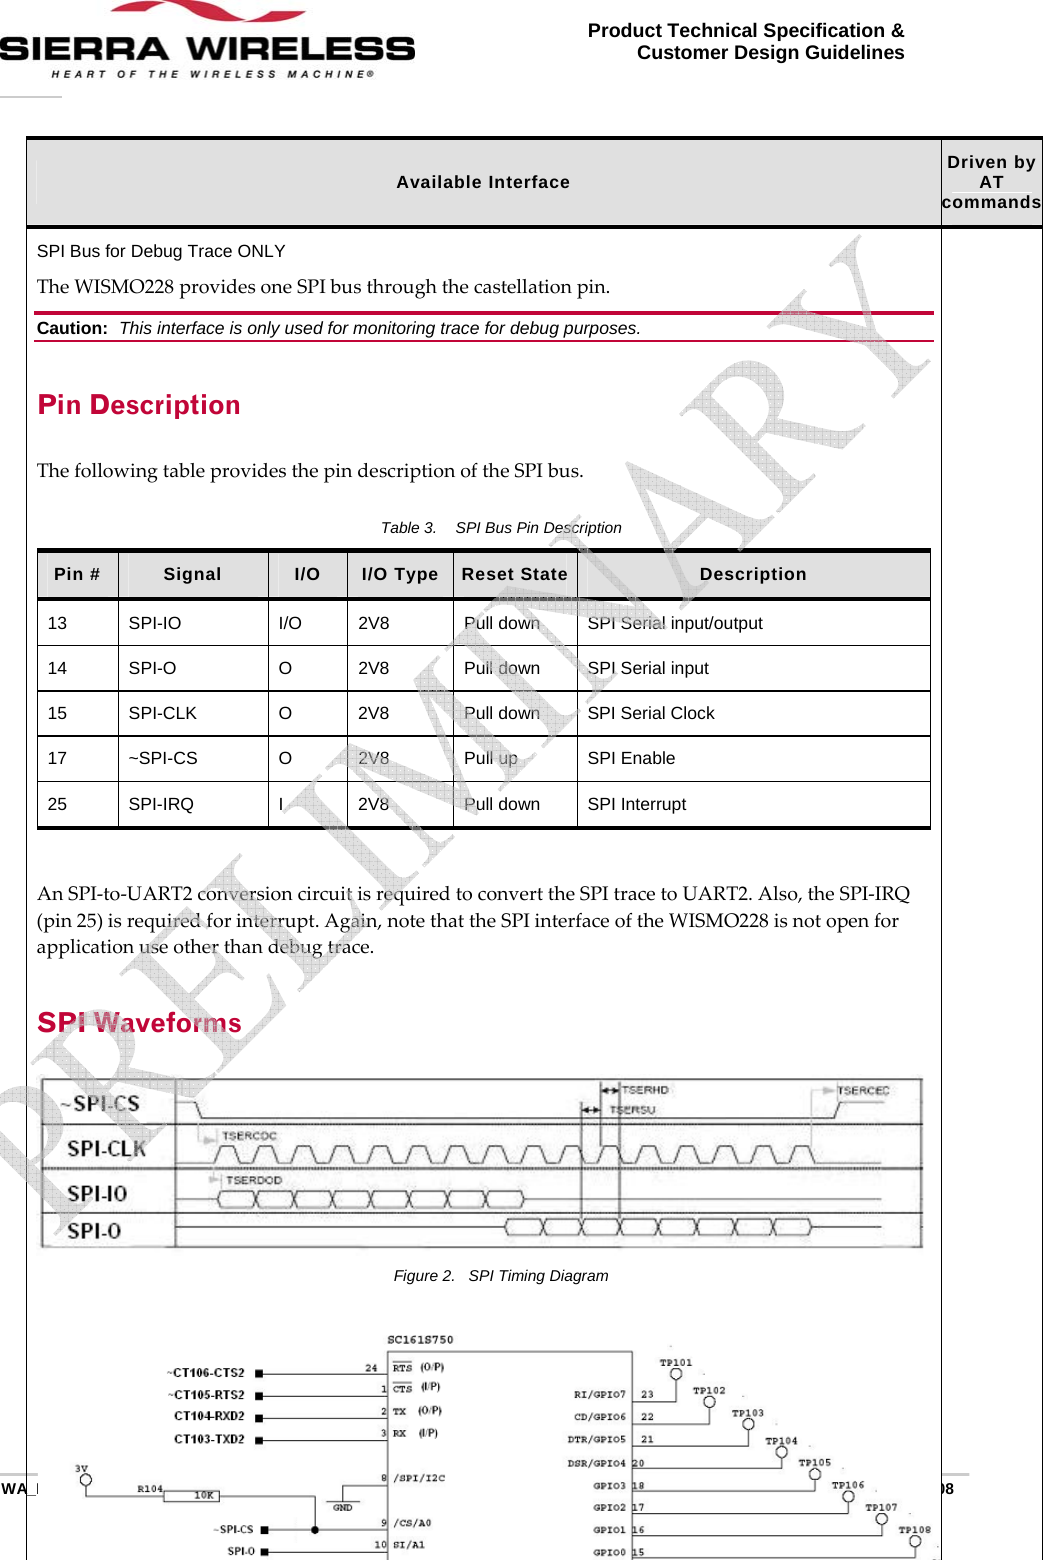      WA_DEV_W228_PTS_002 Rev 001  Page 25 of 108 Product Technical Specification &amp; Customer Design Guidelines Available Interface  Driven by AT commandsSPI Bus for Debug Trace ONLY TheWISMO228providesoneSPIbusthroughthecastellationpin.Caution:  This interface is only used for monitoring trace for debug purposes. Pin Description ThefollowingtableprovidesthepindescriptionoftheSPIbus.Table 3.  SPI Bus Pin Description Pin #  Signal  I/O  I/O Type  Reset State Description 13  SPI-IO  I/O  2V8  Pull down  SPI Serial input/output 14  SPI-O  O  2V8  Pull down  SPI Serial input 15  SPI-CLK  O  2V8  Pull down  SPI Serial Clock 17  ~SPI-CS  O  2V8  Pull up  SPI Enable 25 SPI-IRQ  I  2V8  Pull down SPI Interrupt AnSPI‐to‐UART2conversioncircuitisrequiredtoconverttheSPItracetoUART2.Also,theSPI‐IRQ(pin25)isrequiredforinterrupt.Again,notethattheSPIinterfaceoftheWISMO228isnotopenforapplicationuseotherthandebugtrace.SPI Waveforms Figure 2.  SPI Timing Diagram    